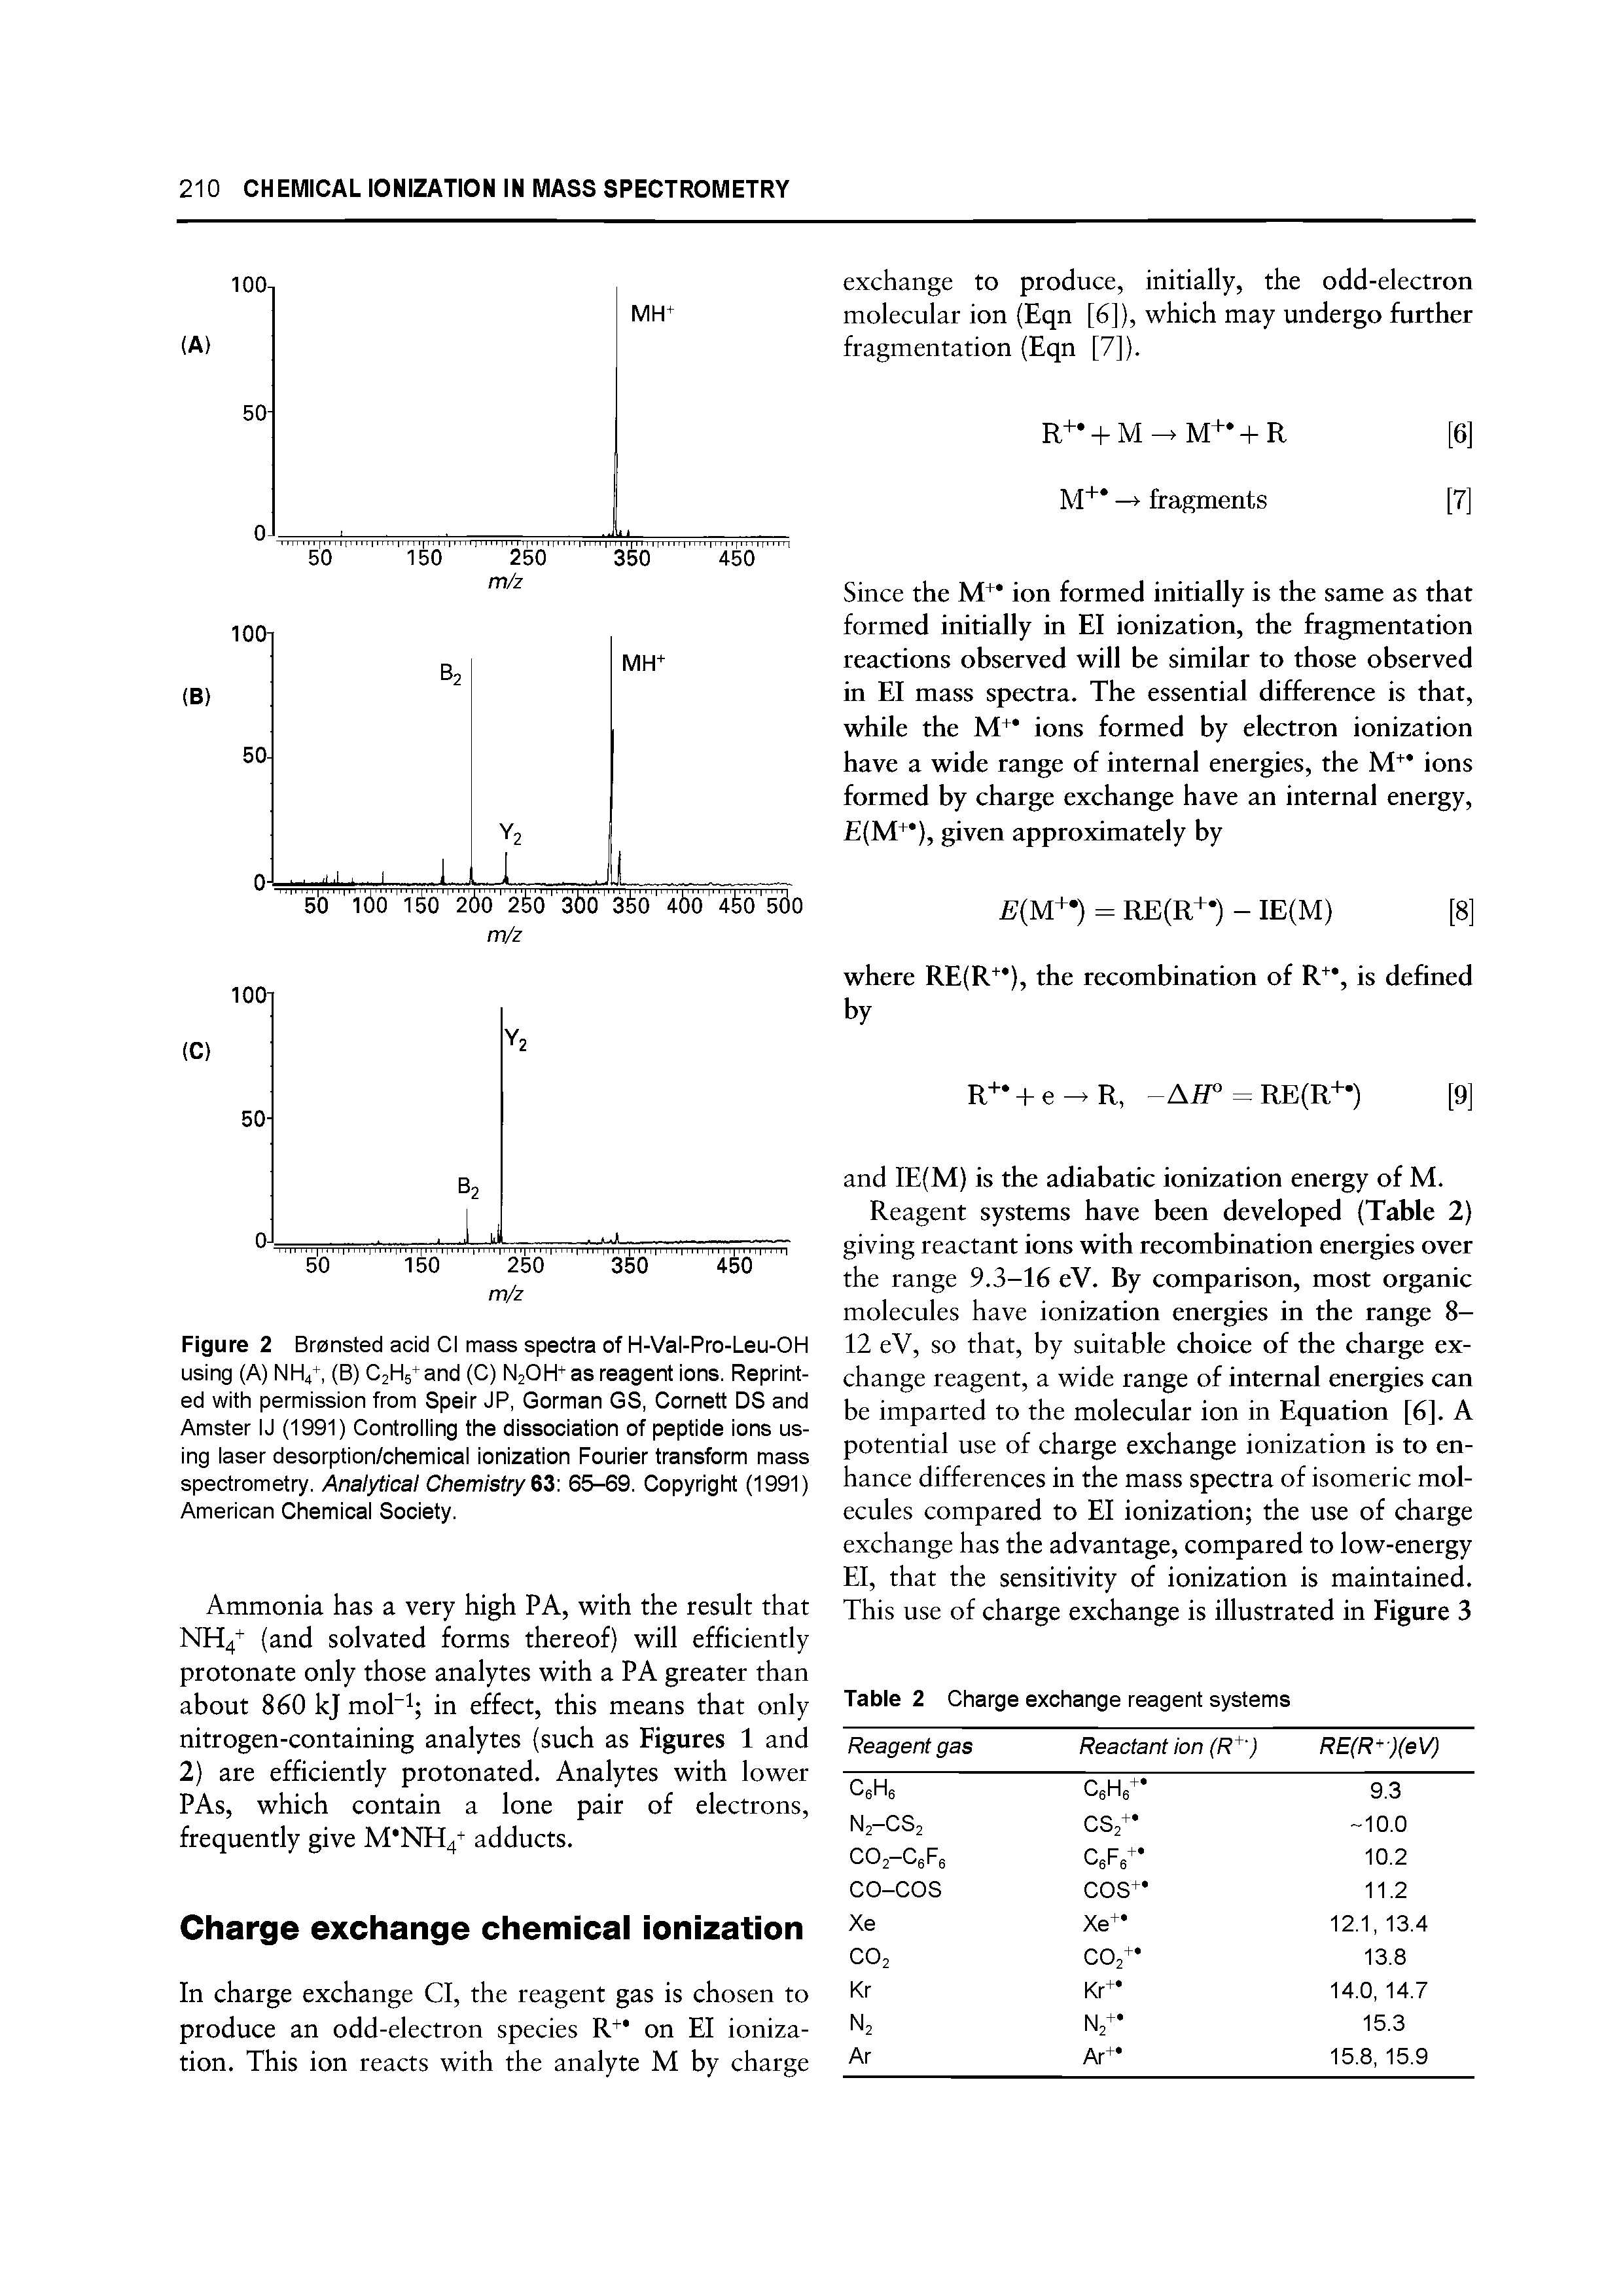 Figure 2 Bronsted acid Cl mass spectra of H-Val-Pro-Leu-OH using (A) NH4+, (B) CjHs+and (C) NjOH as reagent ions. Reprinted with permission from Speir JP, Gorman GS, Cornett DS and Amster IJ (1991) Controlling the dissociation of peptide ions using laser desorption/chemical ionization Fourier transform mass spectrometry. Analytical Chemistry 6Z 65-69. Copyright (1991) American Chemical Society.